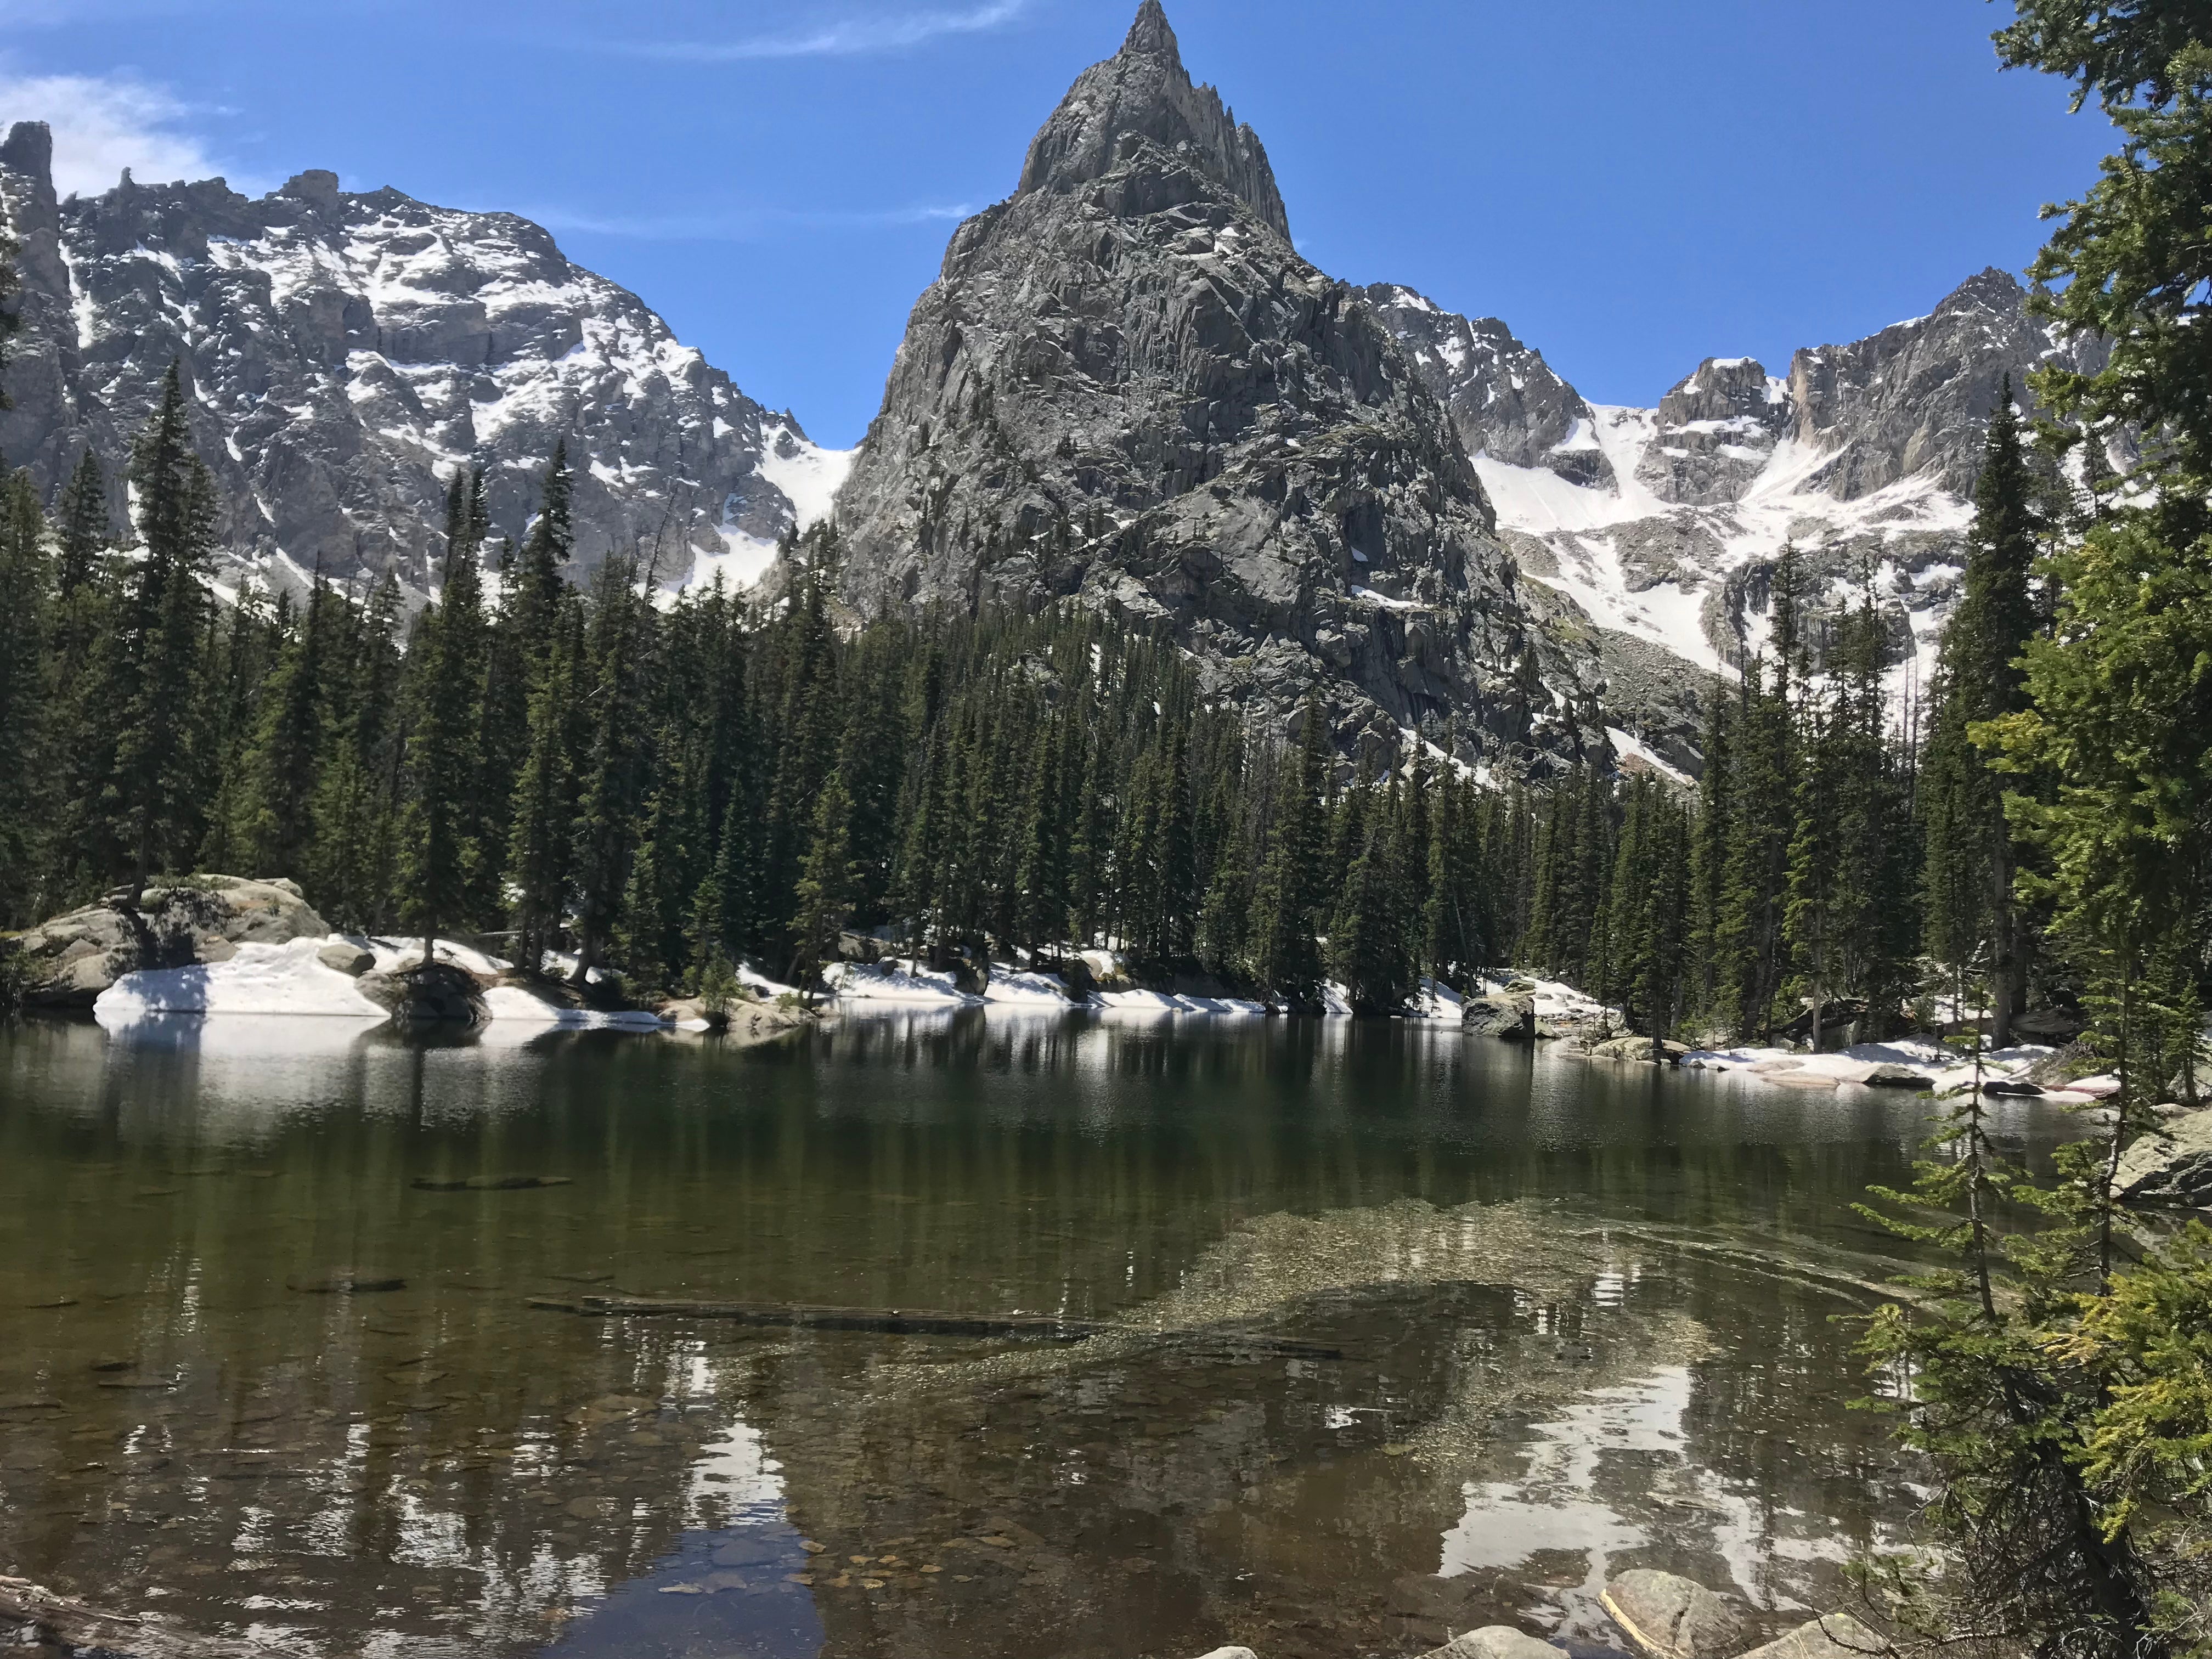 Camper submitted image from Mirror Lake via Monarch Lake Trailhead - 2